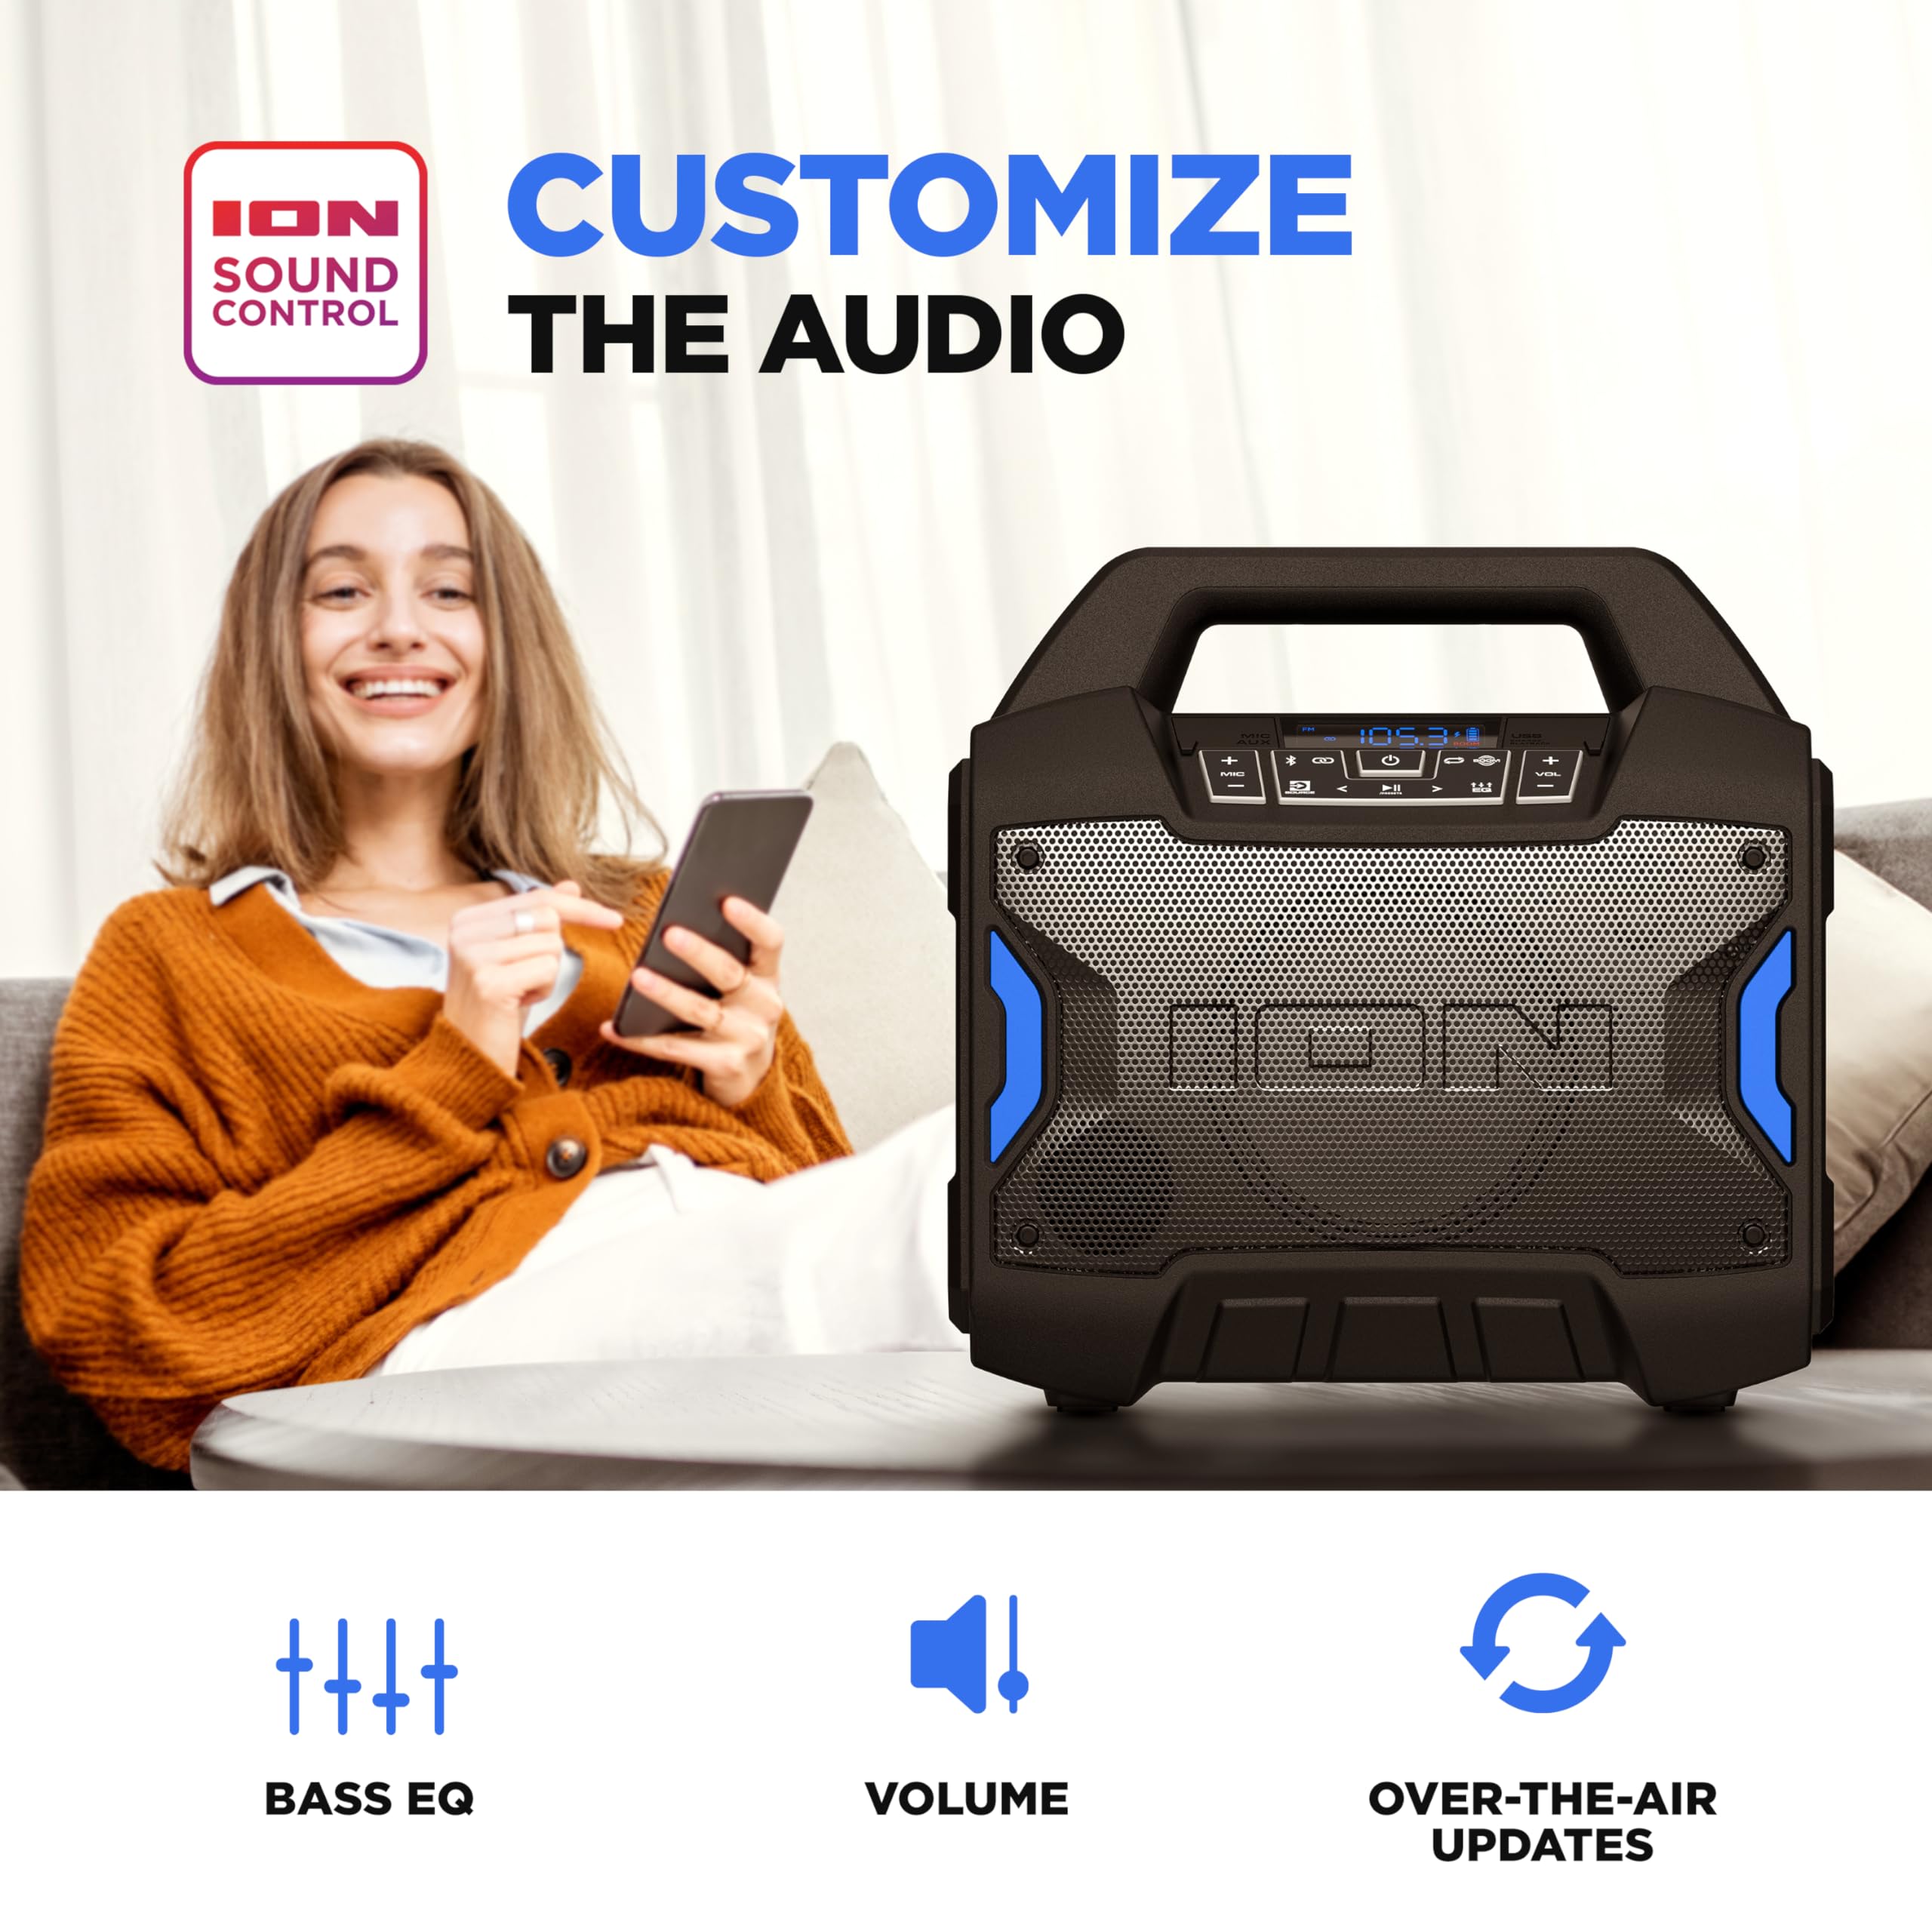 ION Tailgater Boom - Outdoor Portable Bluetooth Speaker with Mic in, FM Radio, USB Port, Battery, IPX5 Water-Resistant, Wireless Stereo-Link, App, 60W